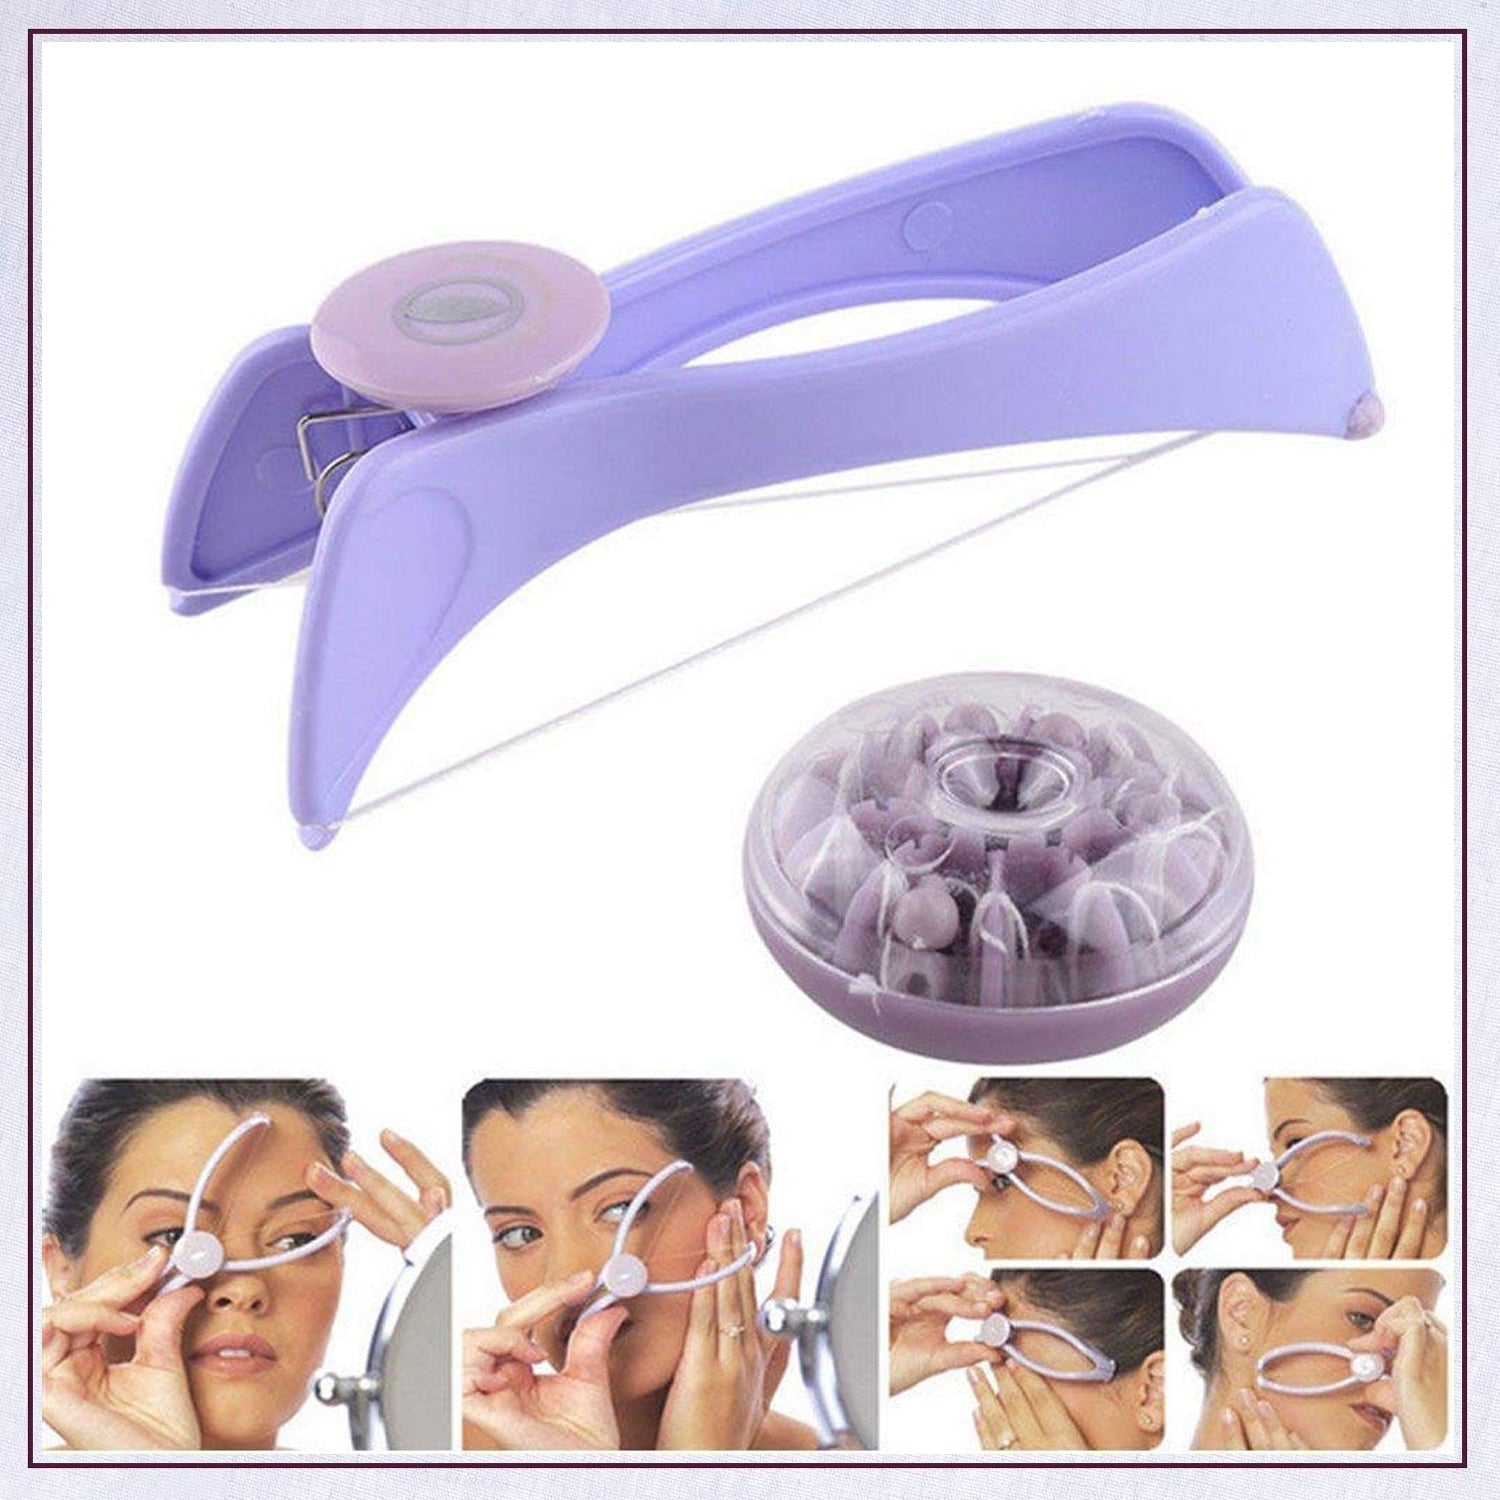 1214A Slique Painless Eyebrow, Upper Lips, Face and Body Hair Removal Threading Manual Tweezer Machine Shaver System Kit Dukandaily